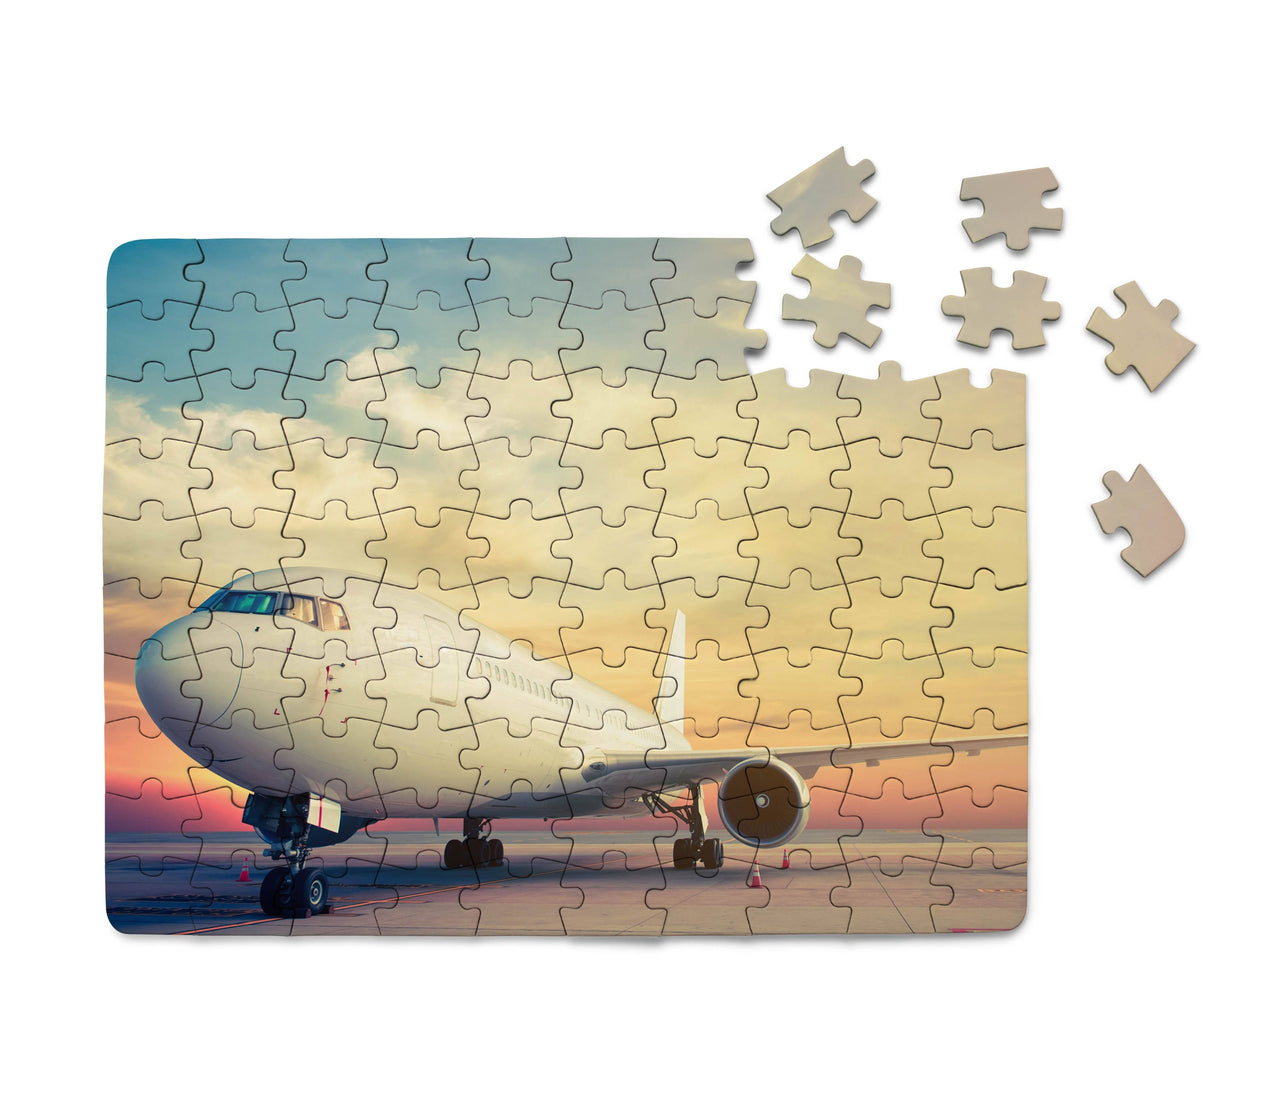 Parked Aircraft During Sunset Printed Puzzles Aviation Shop 